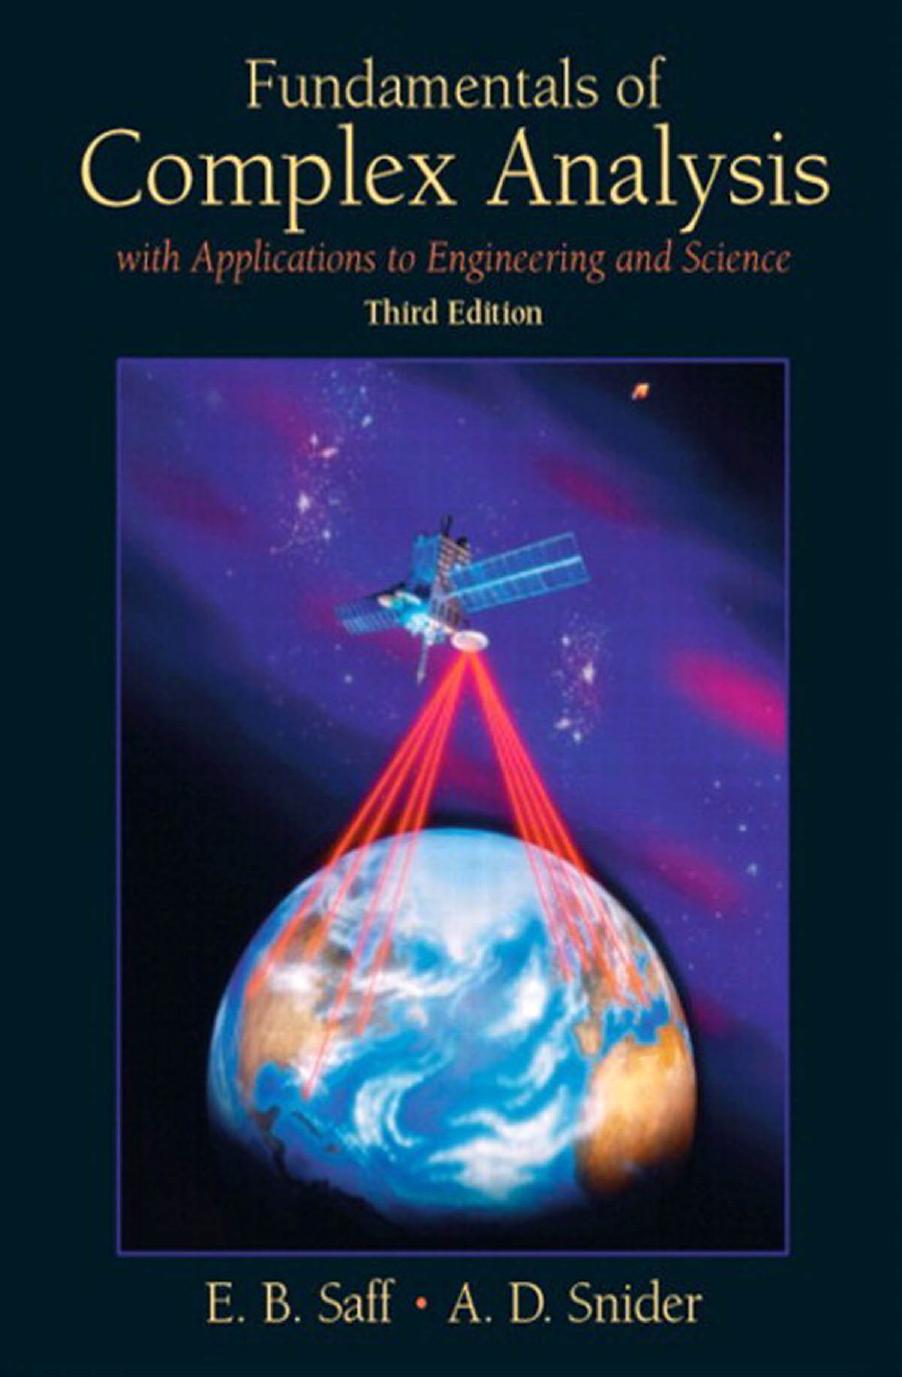 Fundamentals of Complex Analysis: With Applications to Engineering and Science